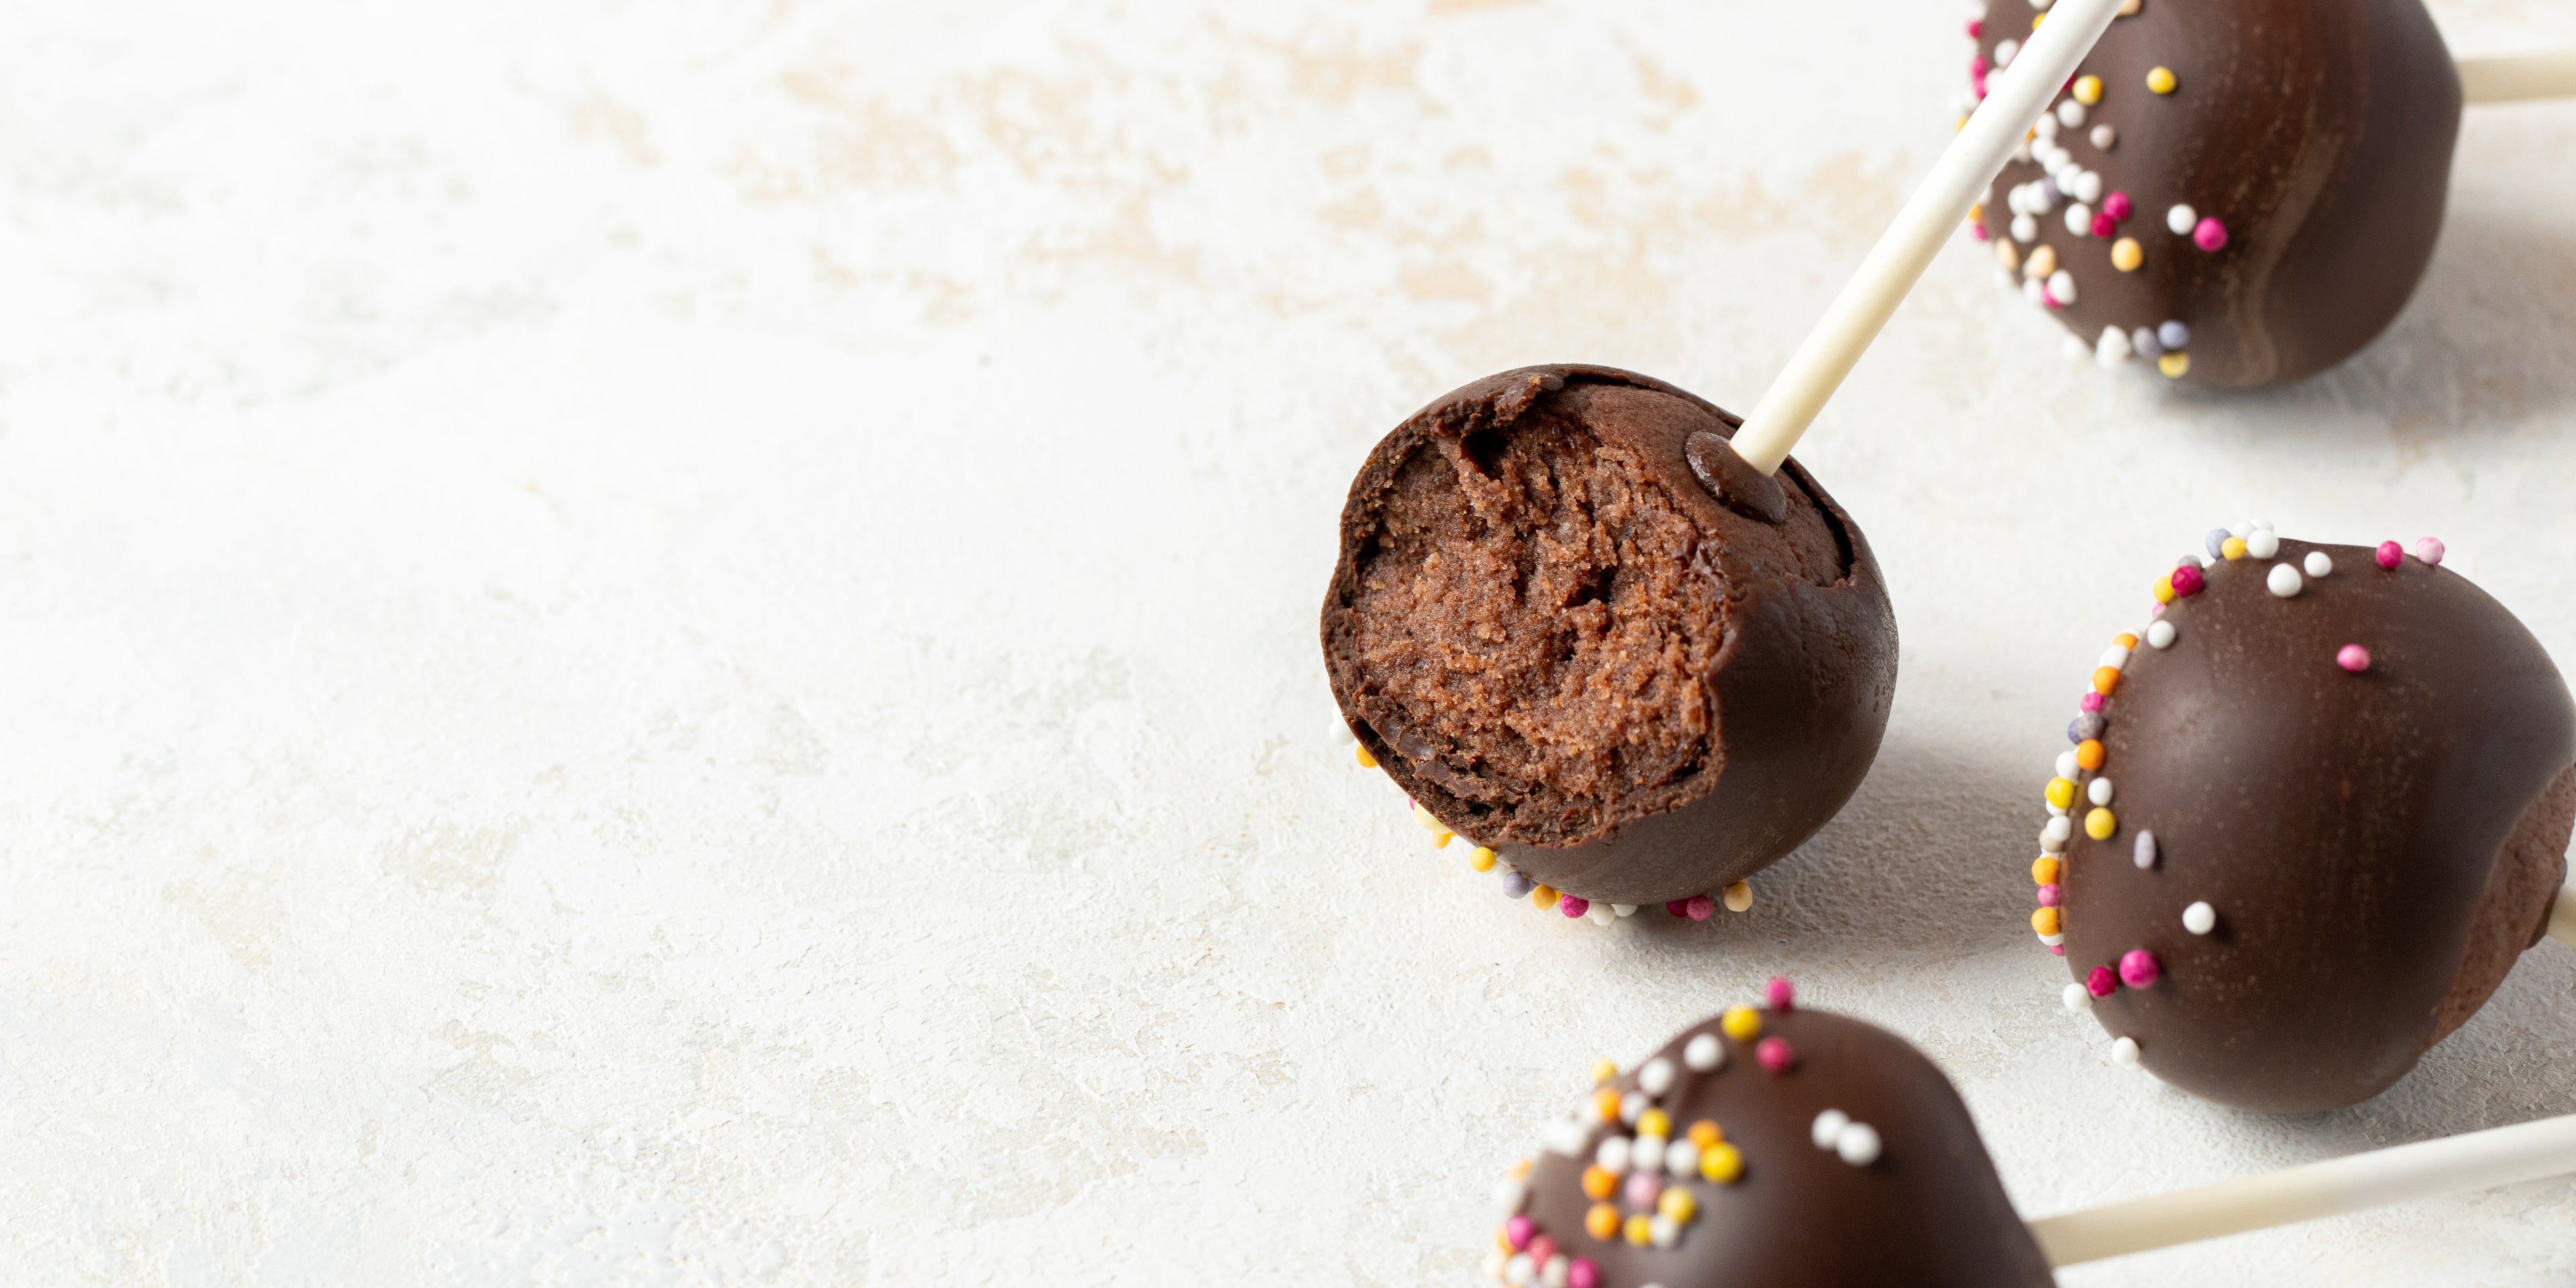 Close up of a Chocolate Cake Pop with a bite taken out of it, showing the chocolate cake centre and chocolate icing coating